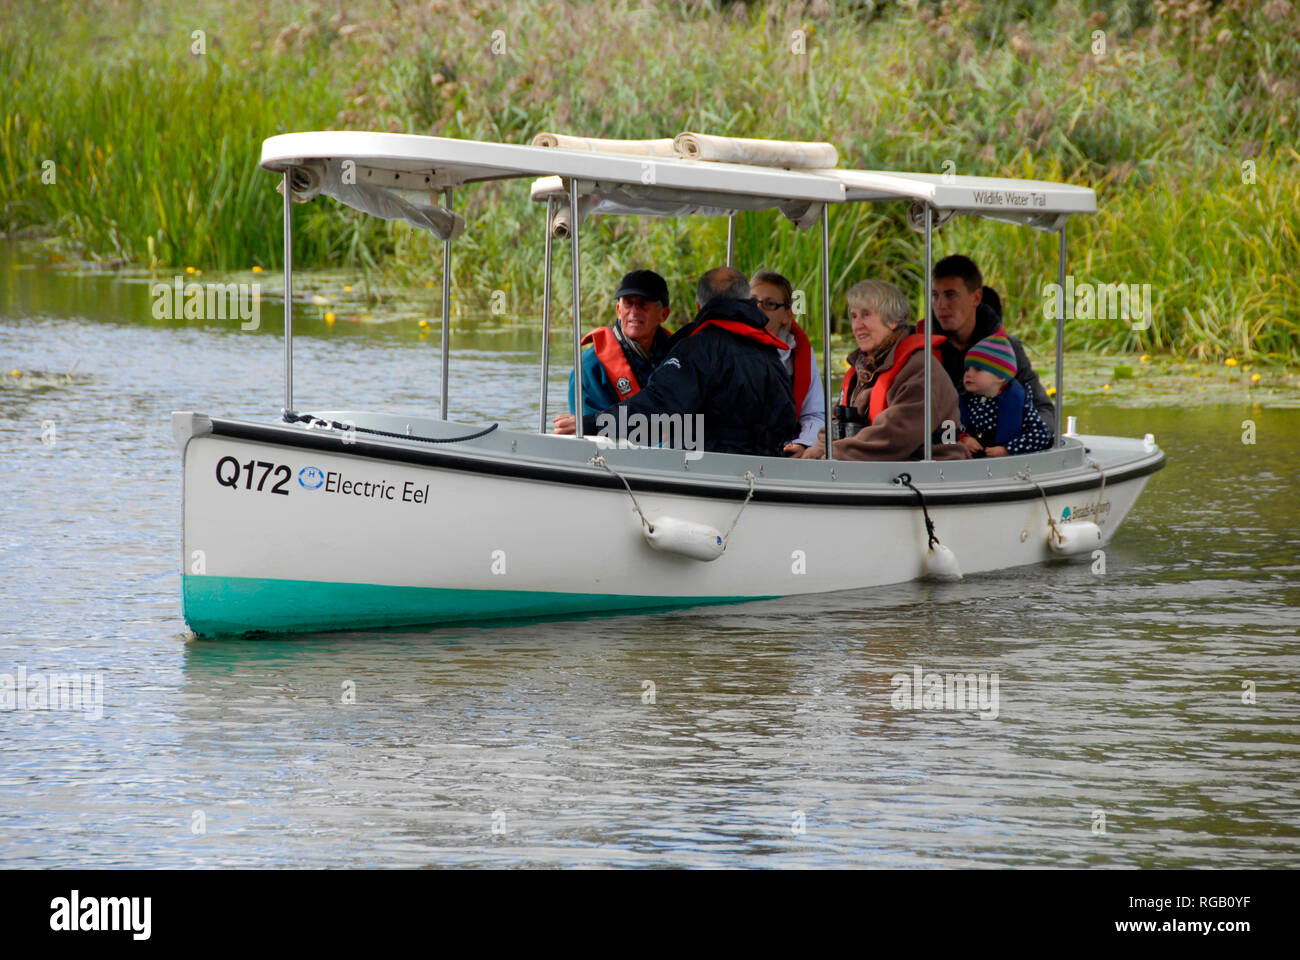 Small electric-powered boat on river Ant, Norfolk Broads, England, taking a small group of people on a nature trail Stock Photo